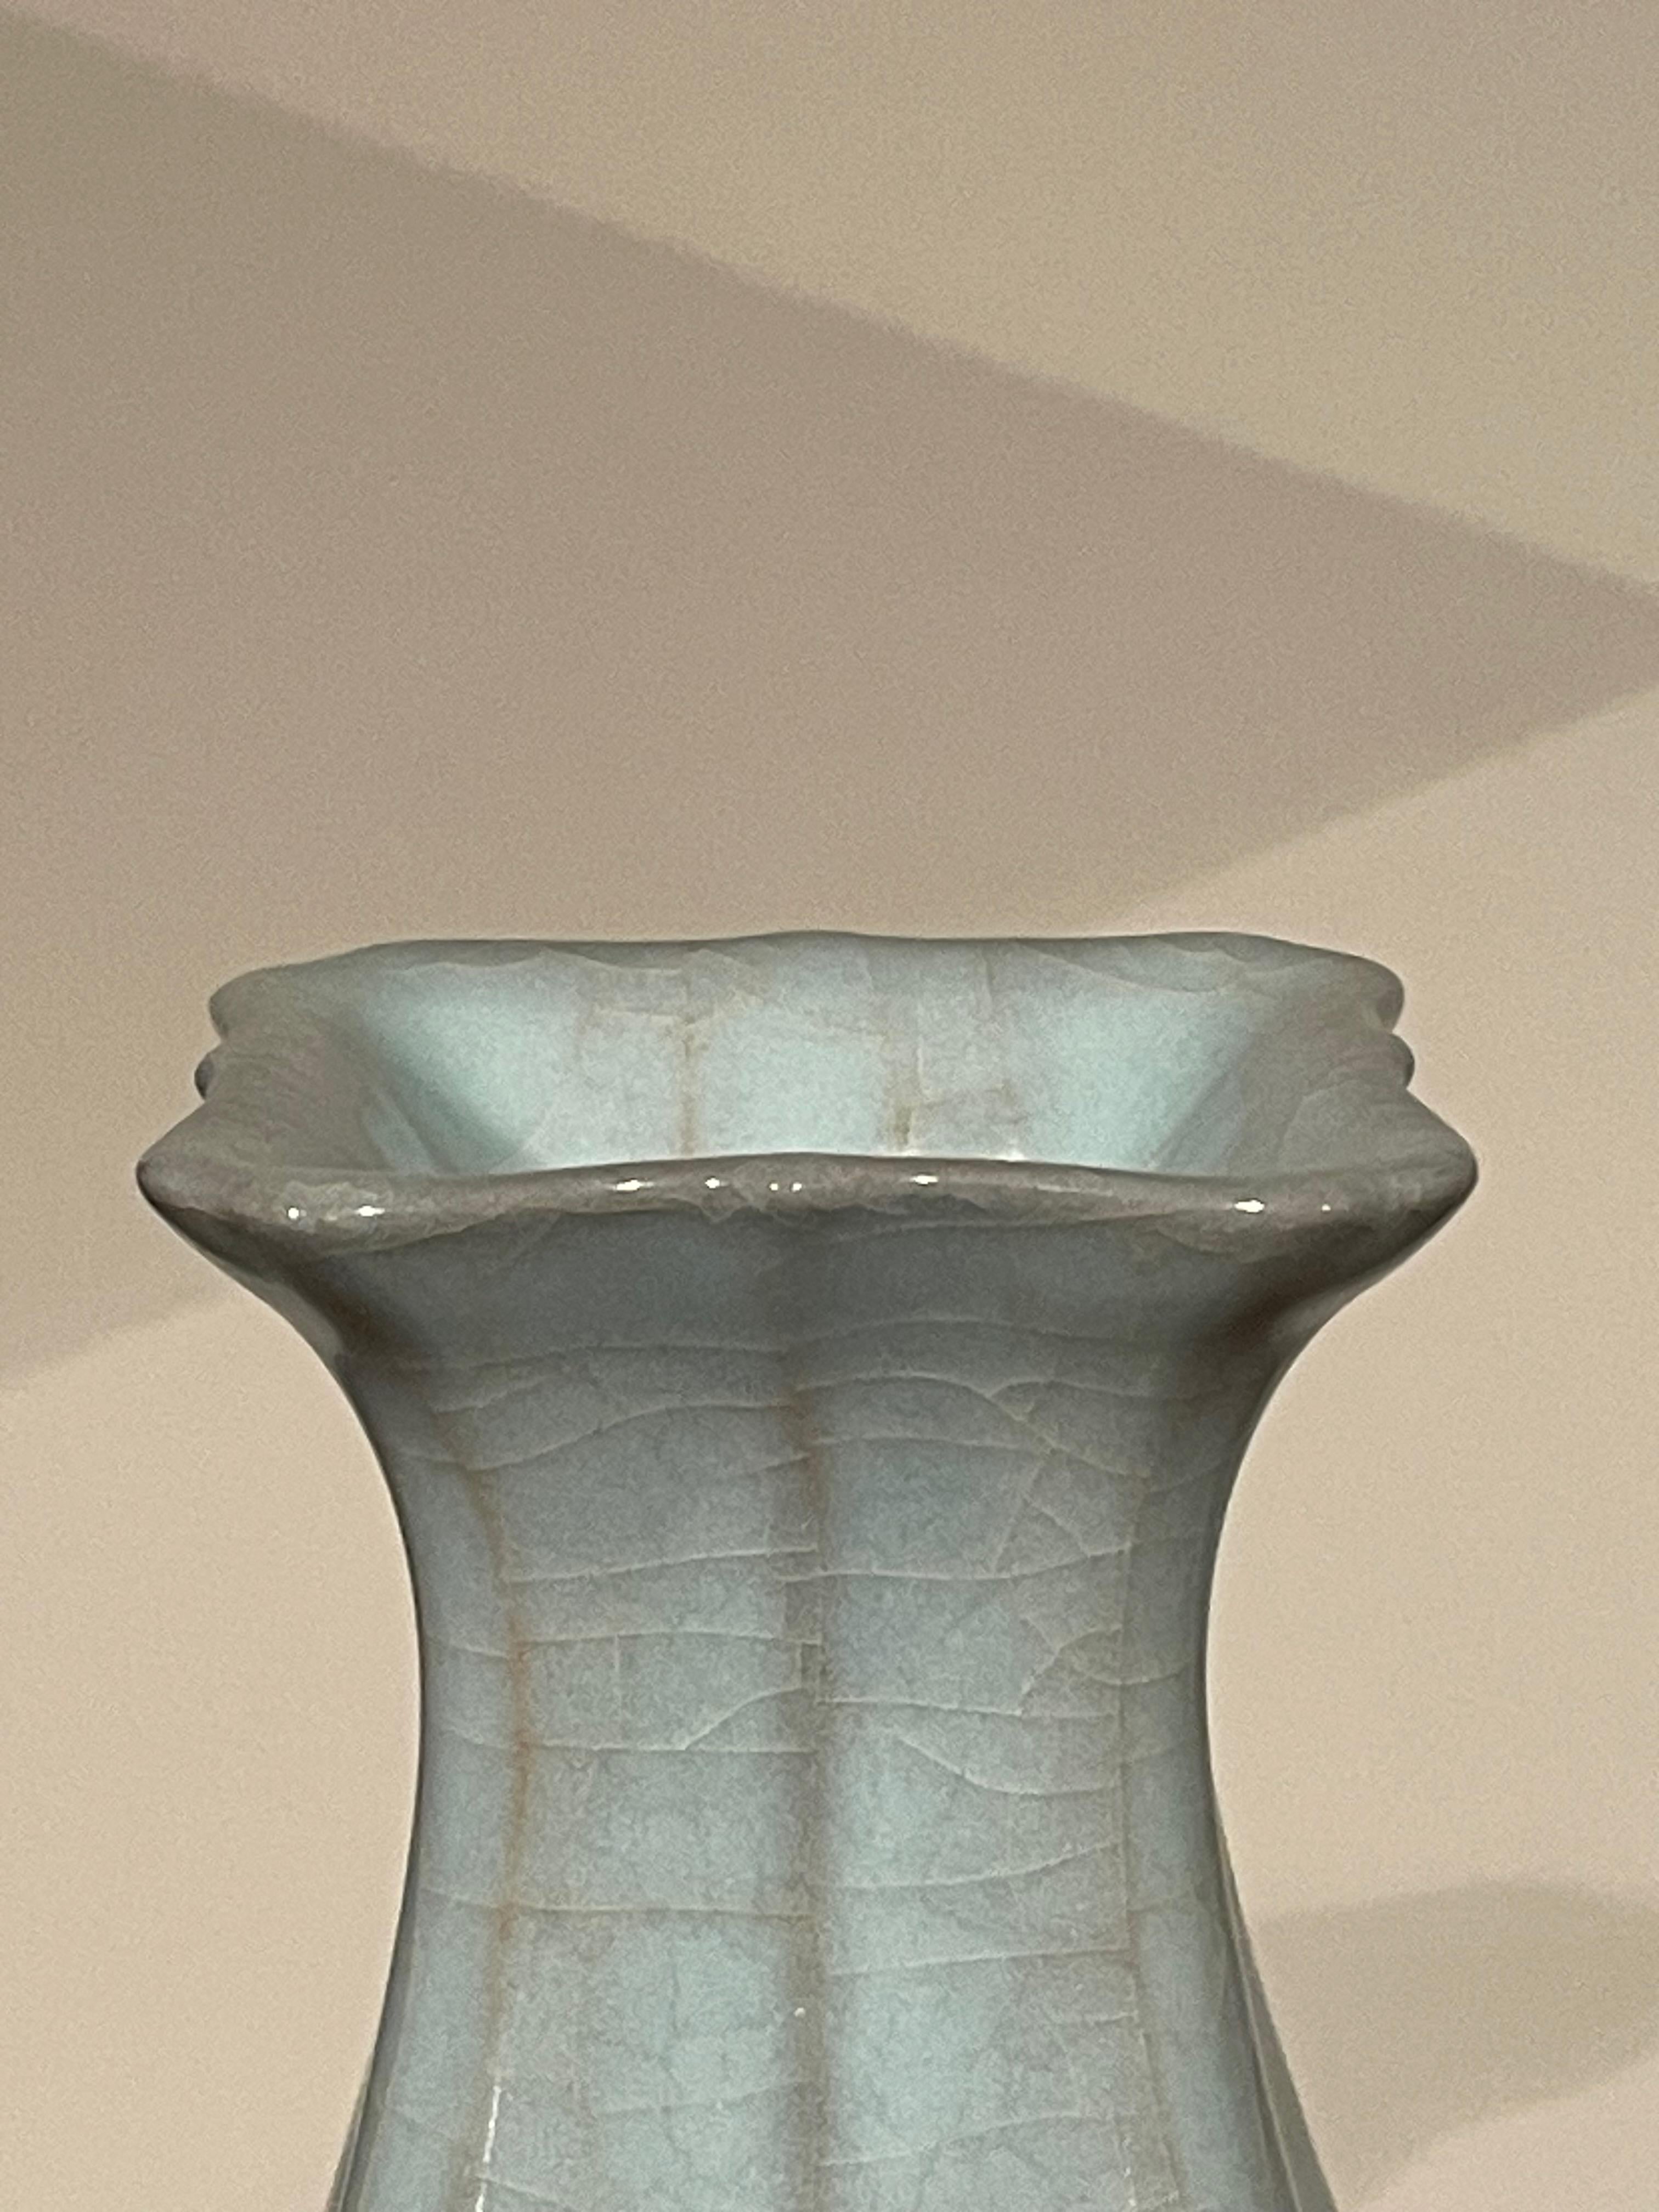 Contemporary Chinese pale turquoise vase.
Square top with ribbed corner design.
Large collection available with varying sizes and shapes.
ARRIVING AUGUST
